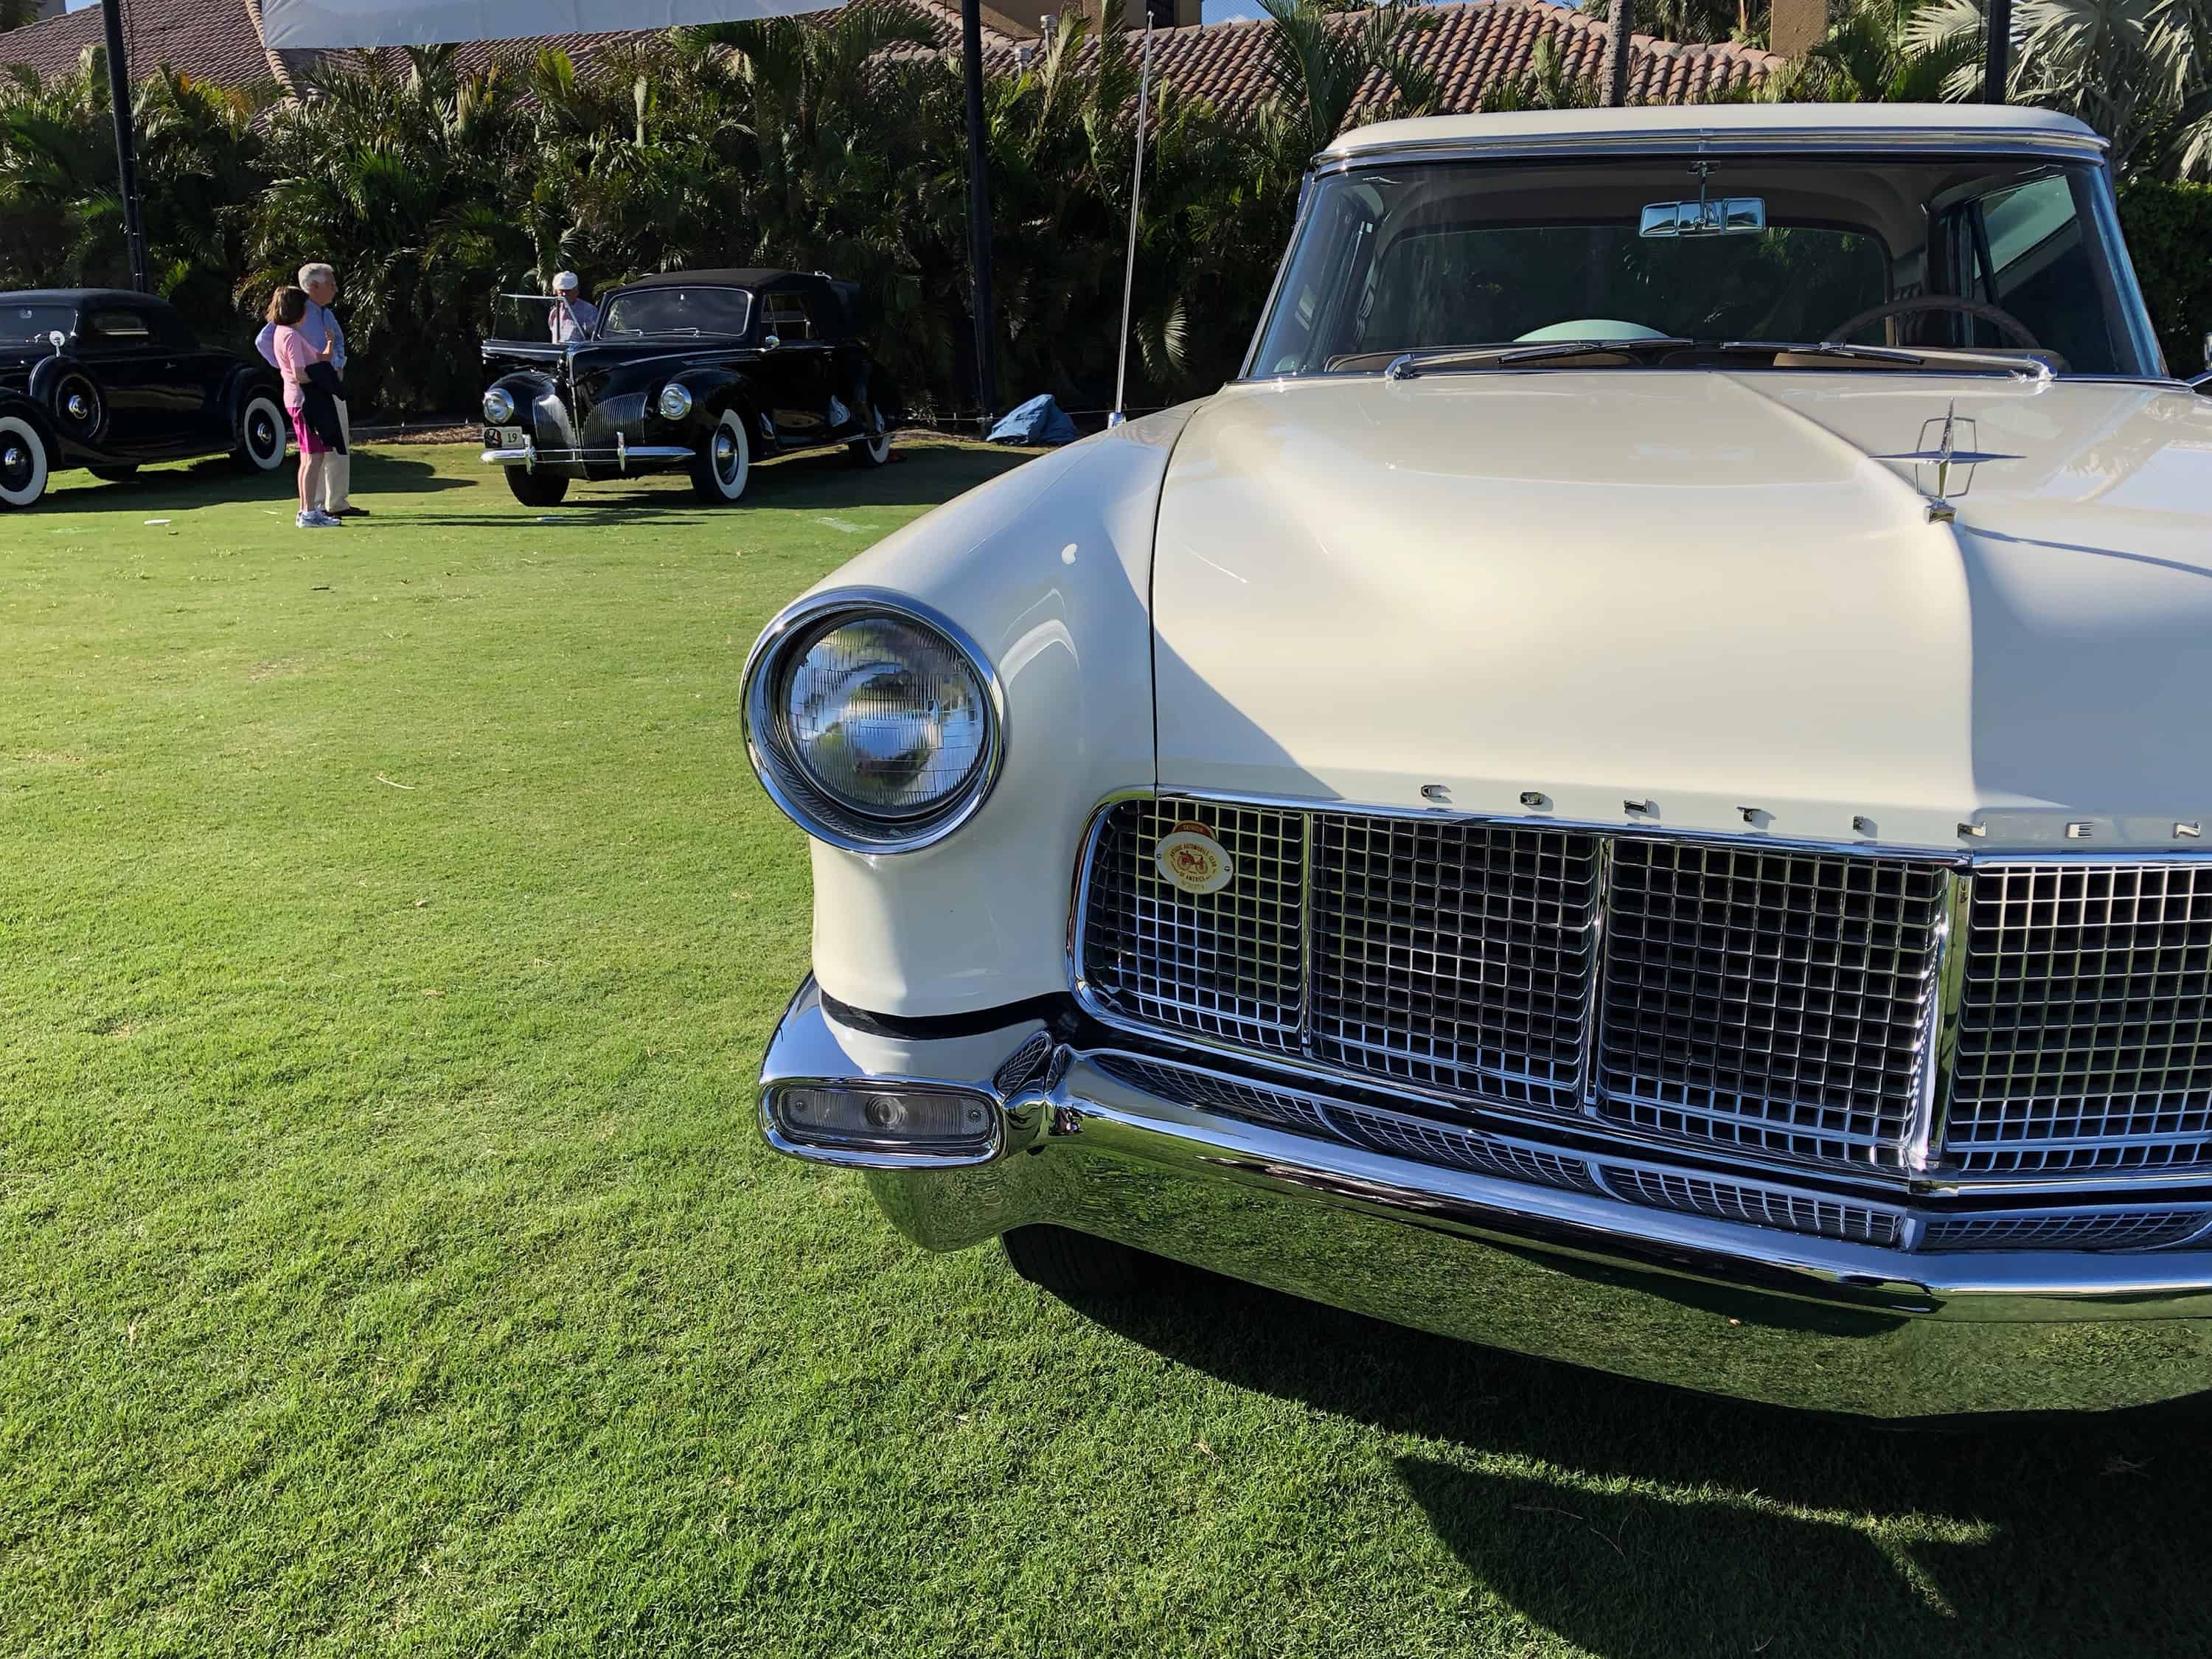 Boca Raton: Concours for a cause, and with great cars | ClassicCars.com